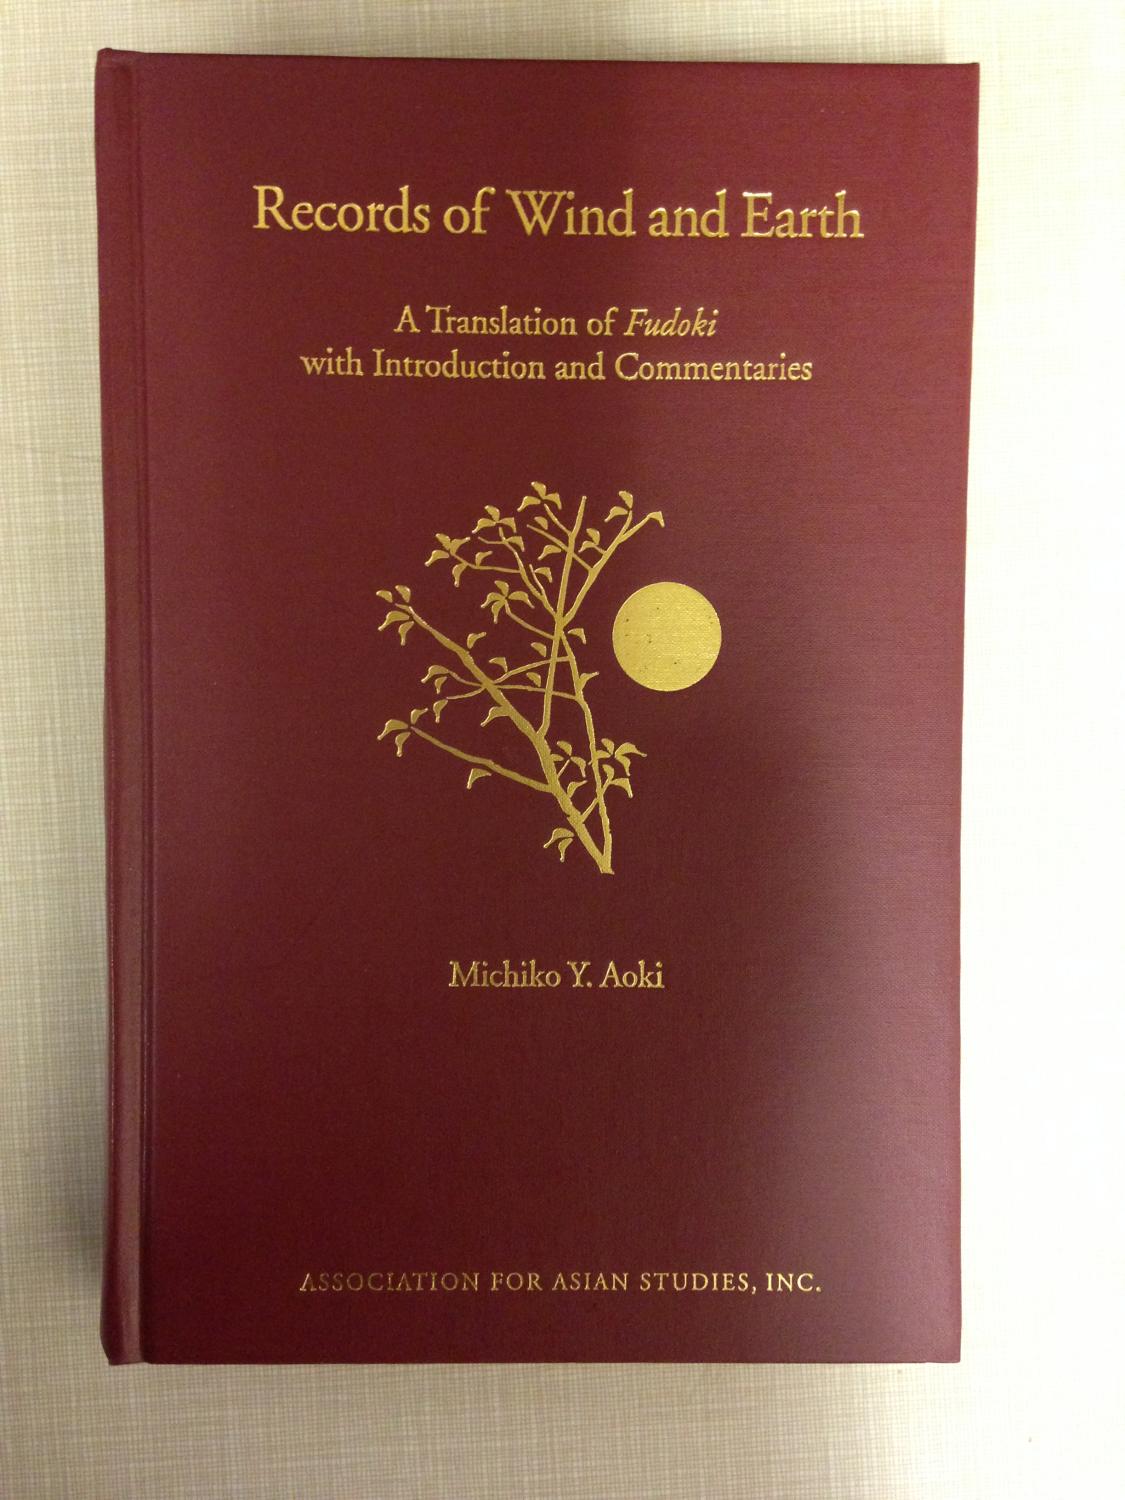 Records of Wind and Earth: A Translation of Fudoki, With Introduction and Commentaries (MONOGRAPHS OF THE ASSOCIATION FOR ASIAN STUDIES)